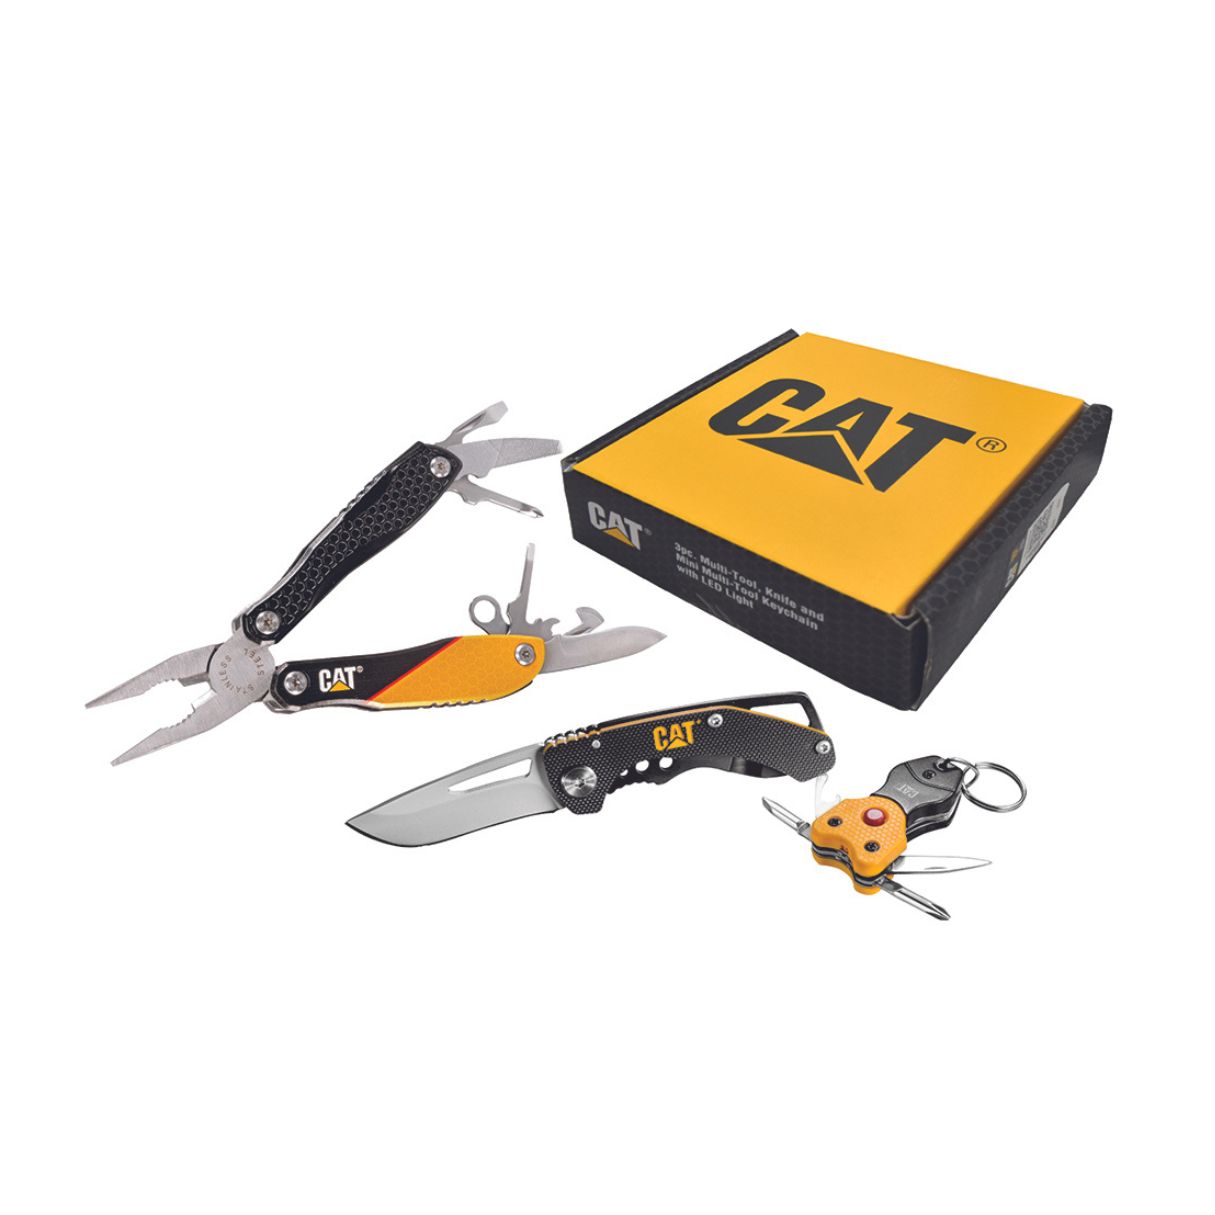 Who Makes Cat Hand Tools